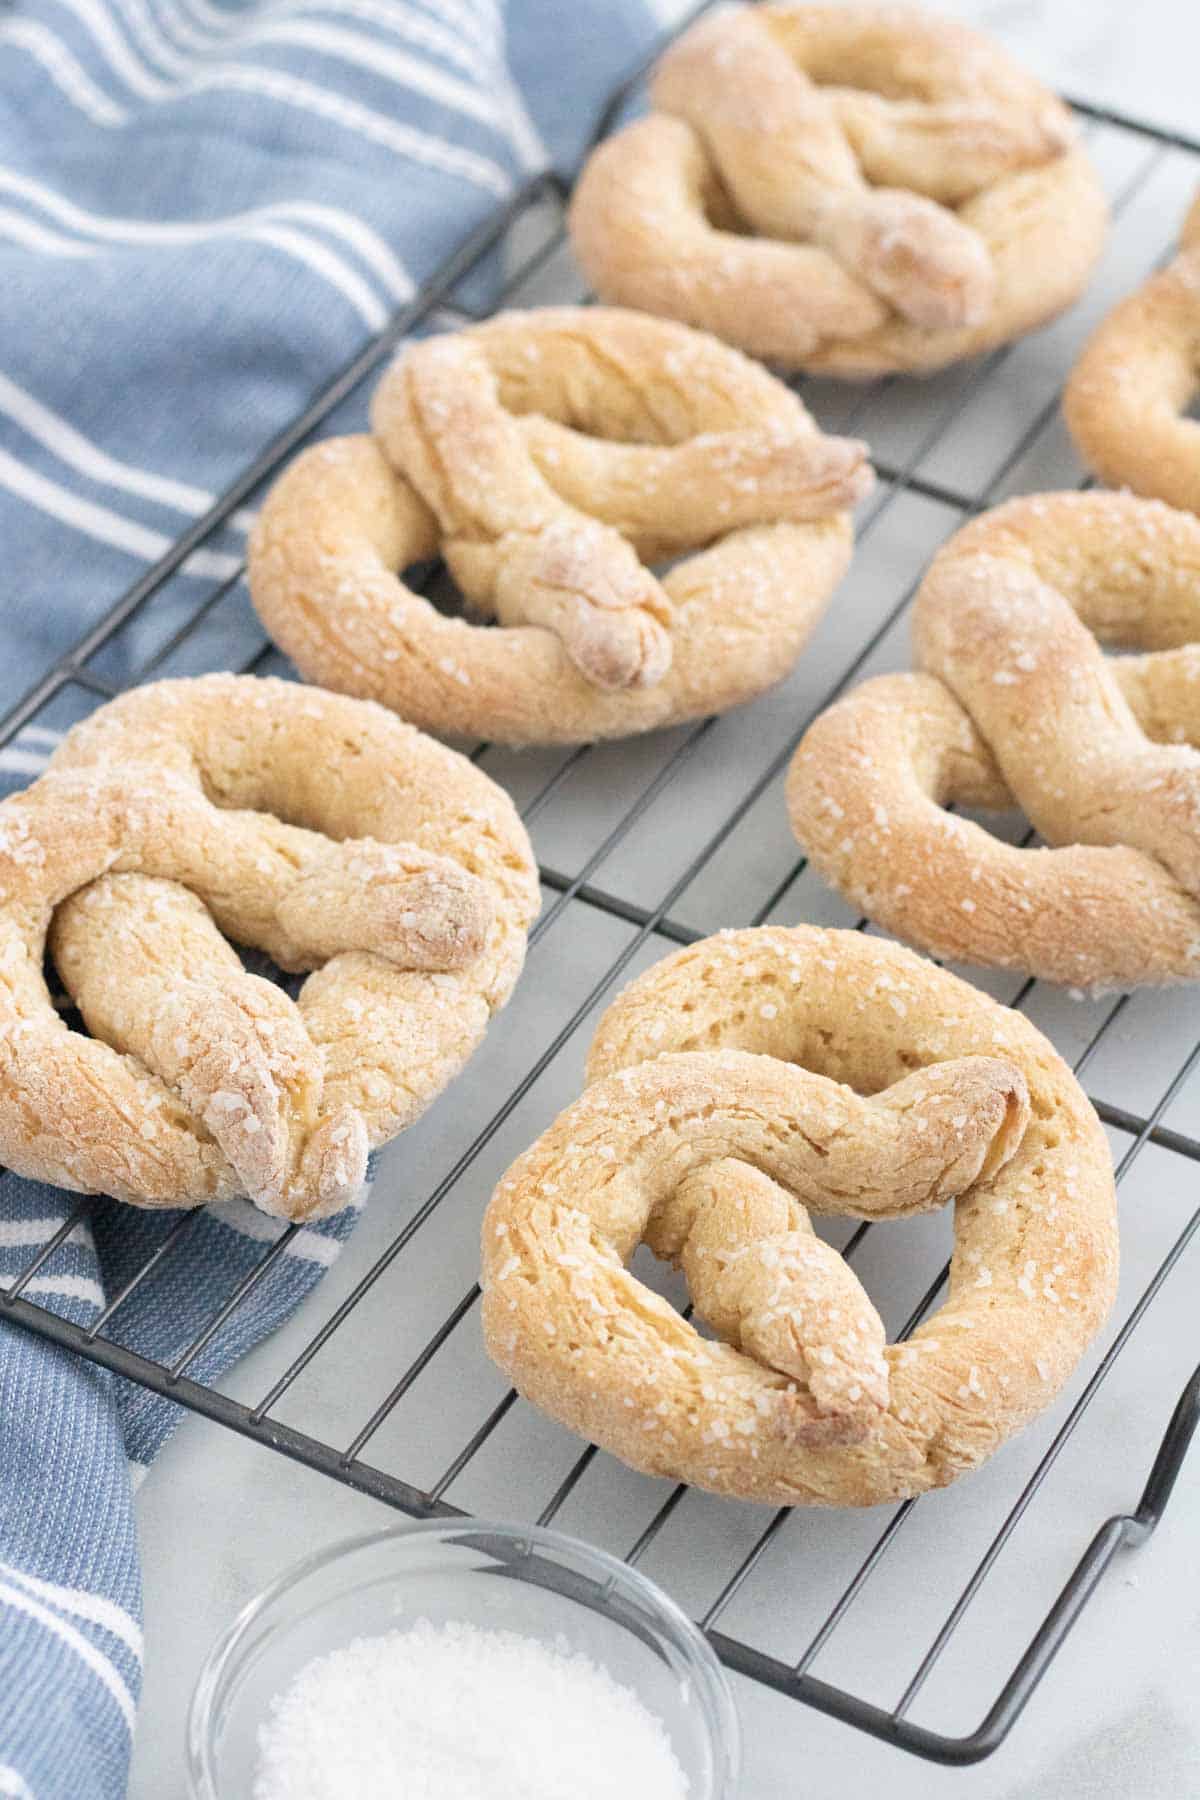 Baked soft pretzels on a wire rack.